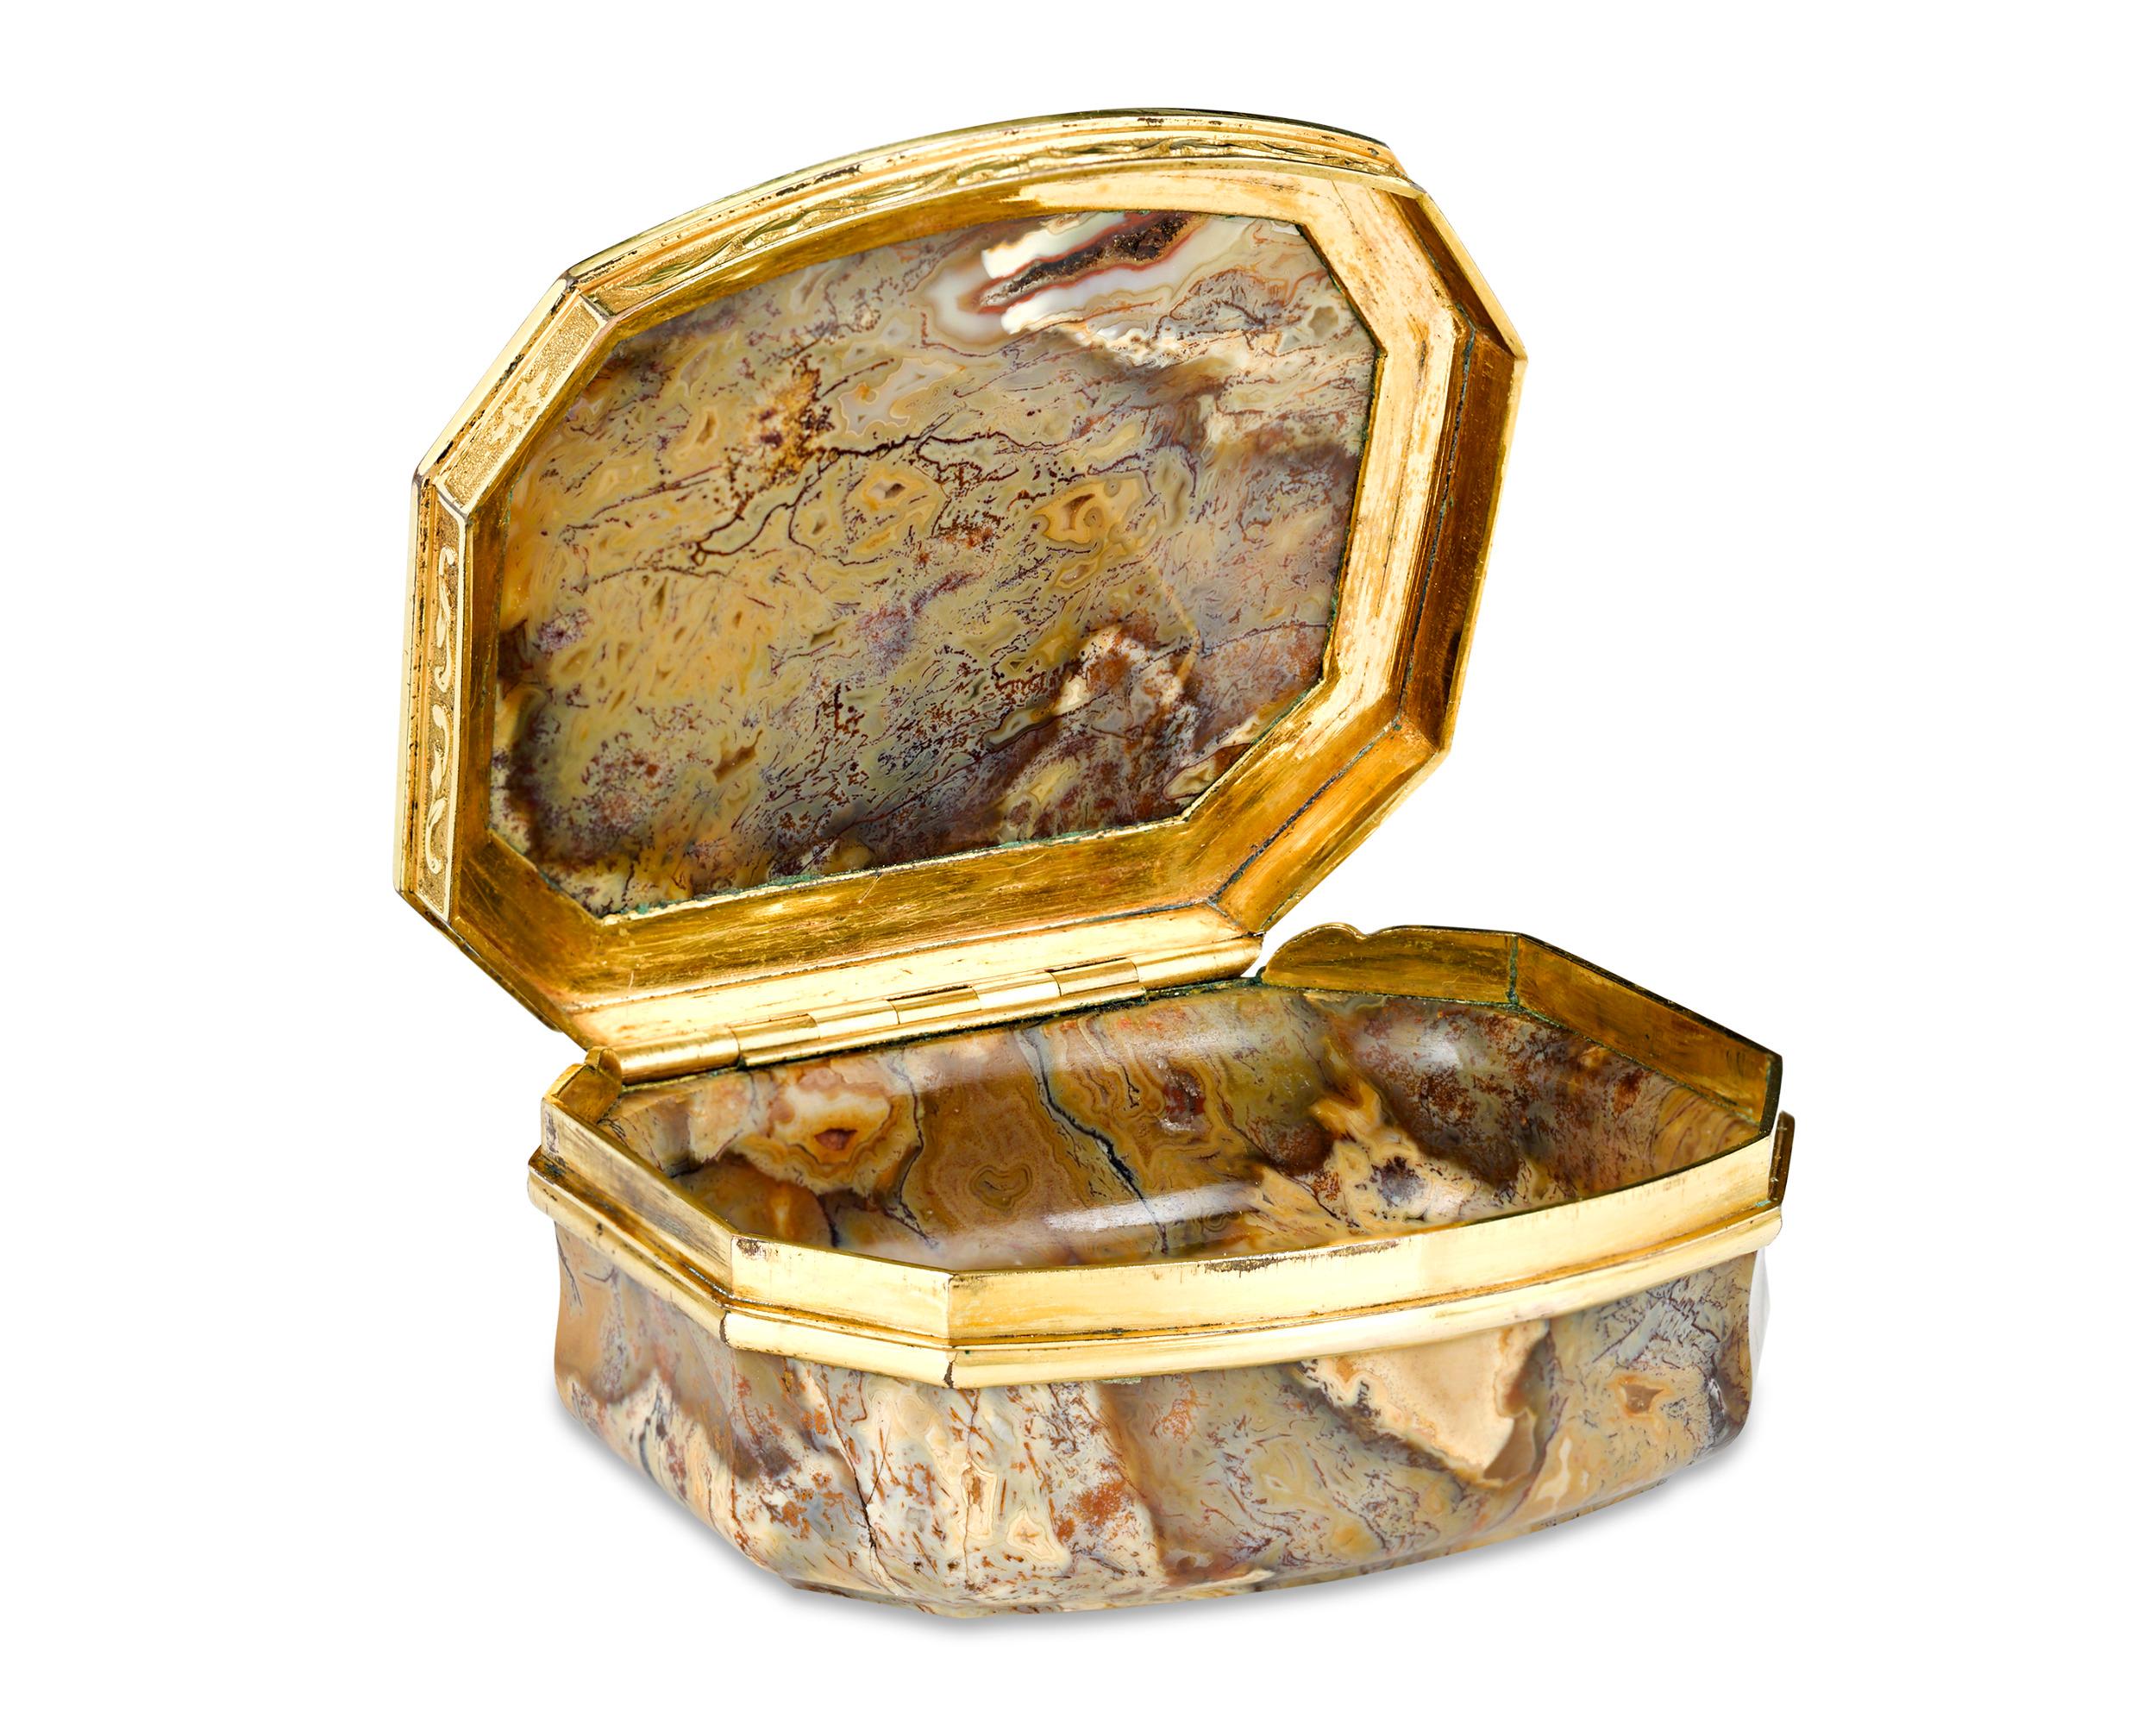 Trimmed in elegant yellow gold is this polished English agate snuff box. Distinguished by the dynamic patterning of the agate, the exquisite vessel is the finely chiseled 10-Karat gold foliage, which provides a beautiful contrast. Symbols of luxury